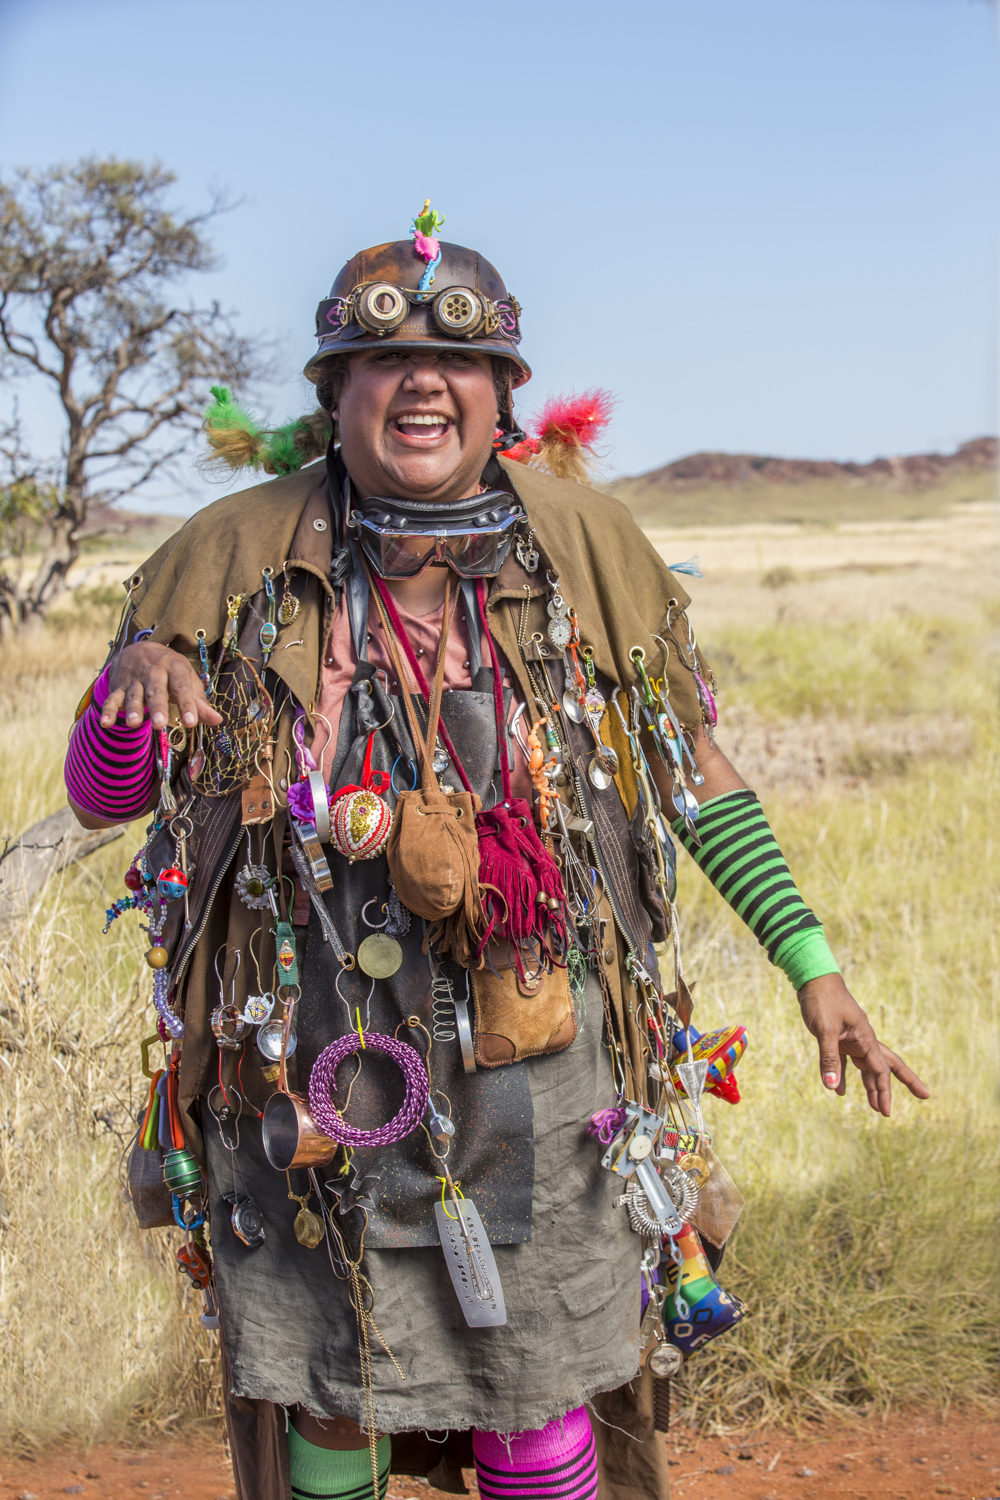 A woman wears steampunk inspired helmet, goggles and jacket adorned with hanging objects, stands and laughs in desert landscape.